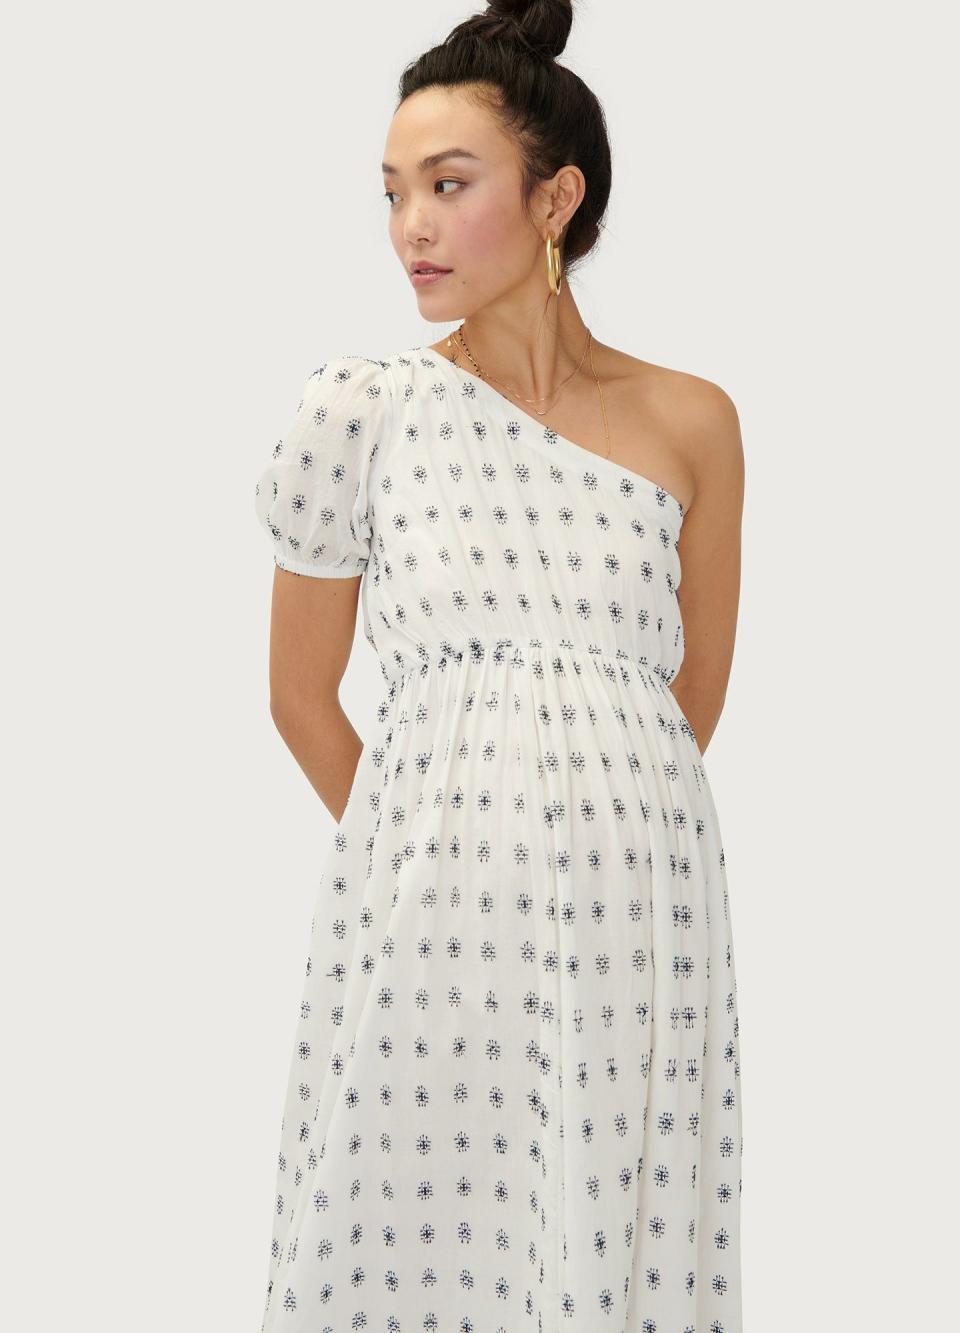 <p><strong>Hatch Collection</strong></p><p>hatchcollection.com</p><p><strong>$97.30</strong></p><p>One-shoulder dresses are so underrated. This dress from Hatch features a puffed sleeve, elastic waistband that stretches so you can wear it during pregnancy and beyond, and an embroidered crosshatch design. </p><p><strong>Sizes: 0 - 16</strong></p>